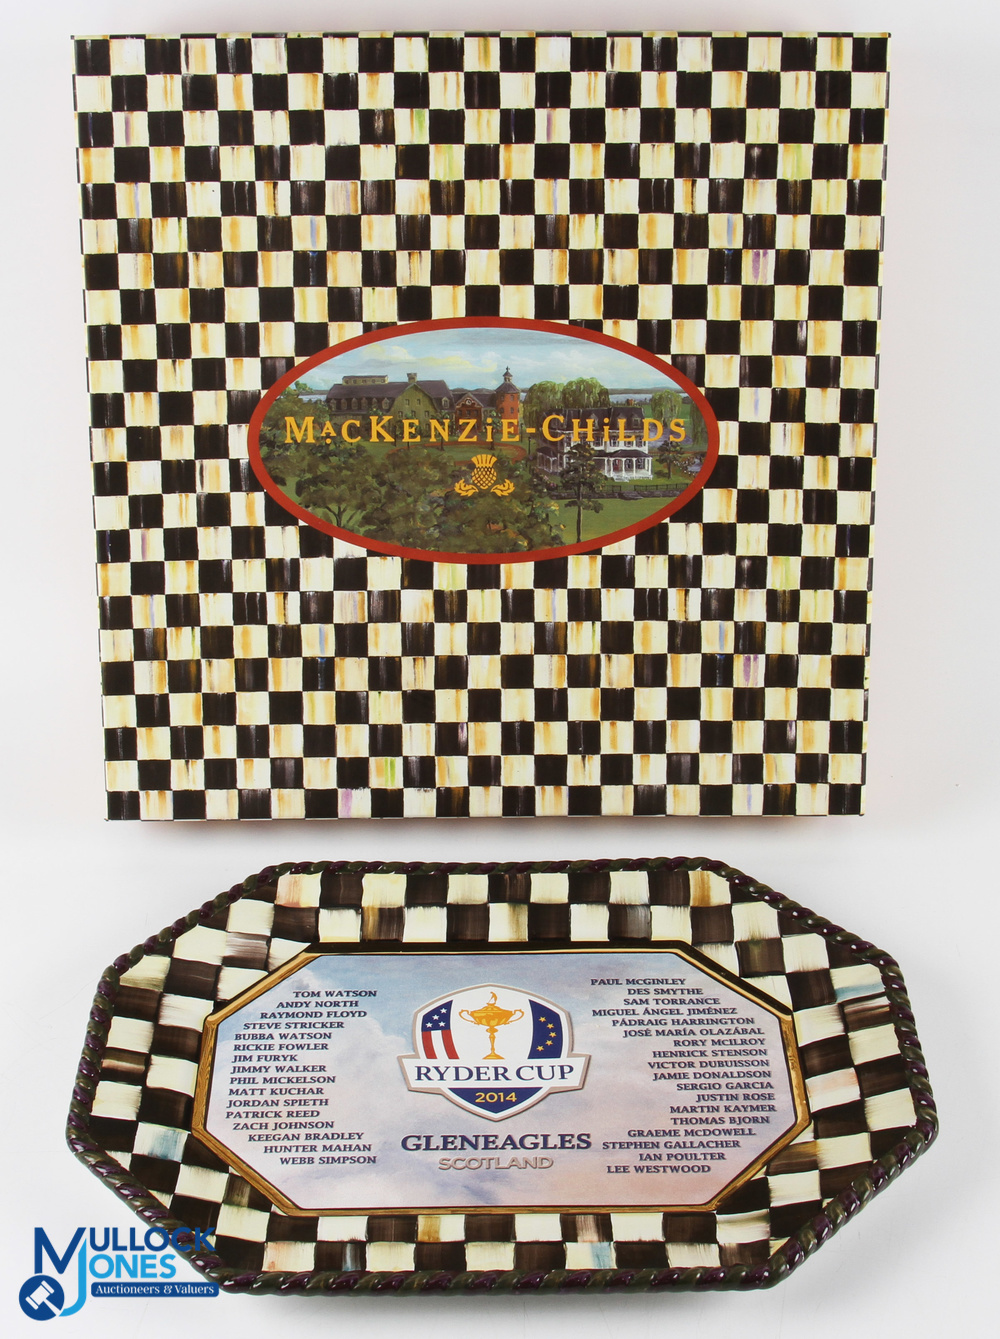 Rare 2014 Ryder Cup Gleneagles Mackenzie-Childs USA large decorative serving platter - the - Image 2 of 2